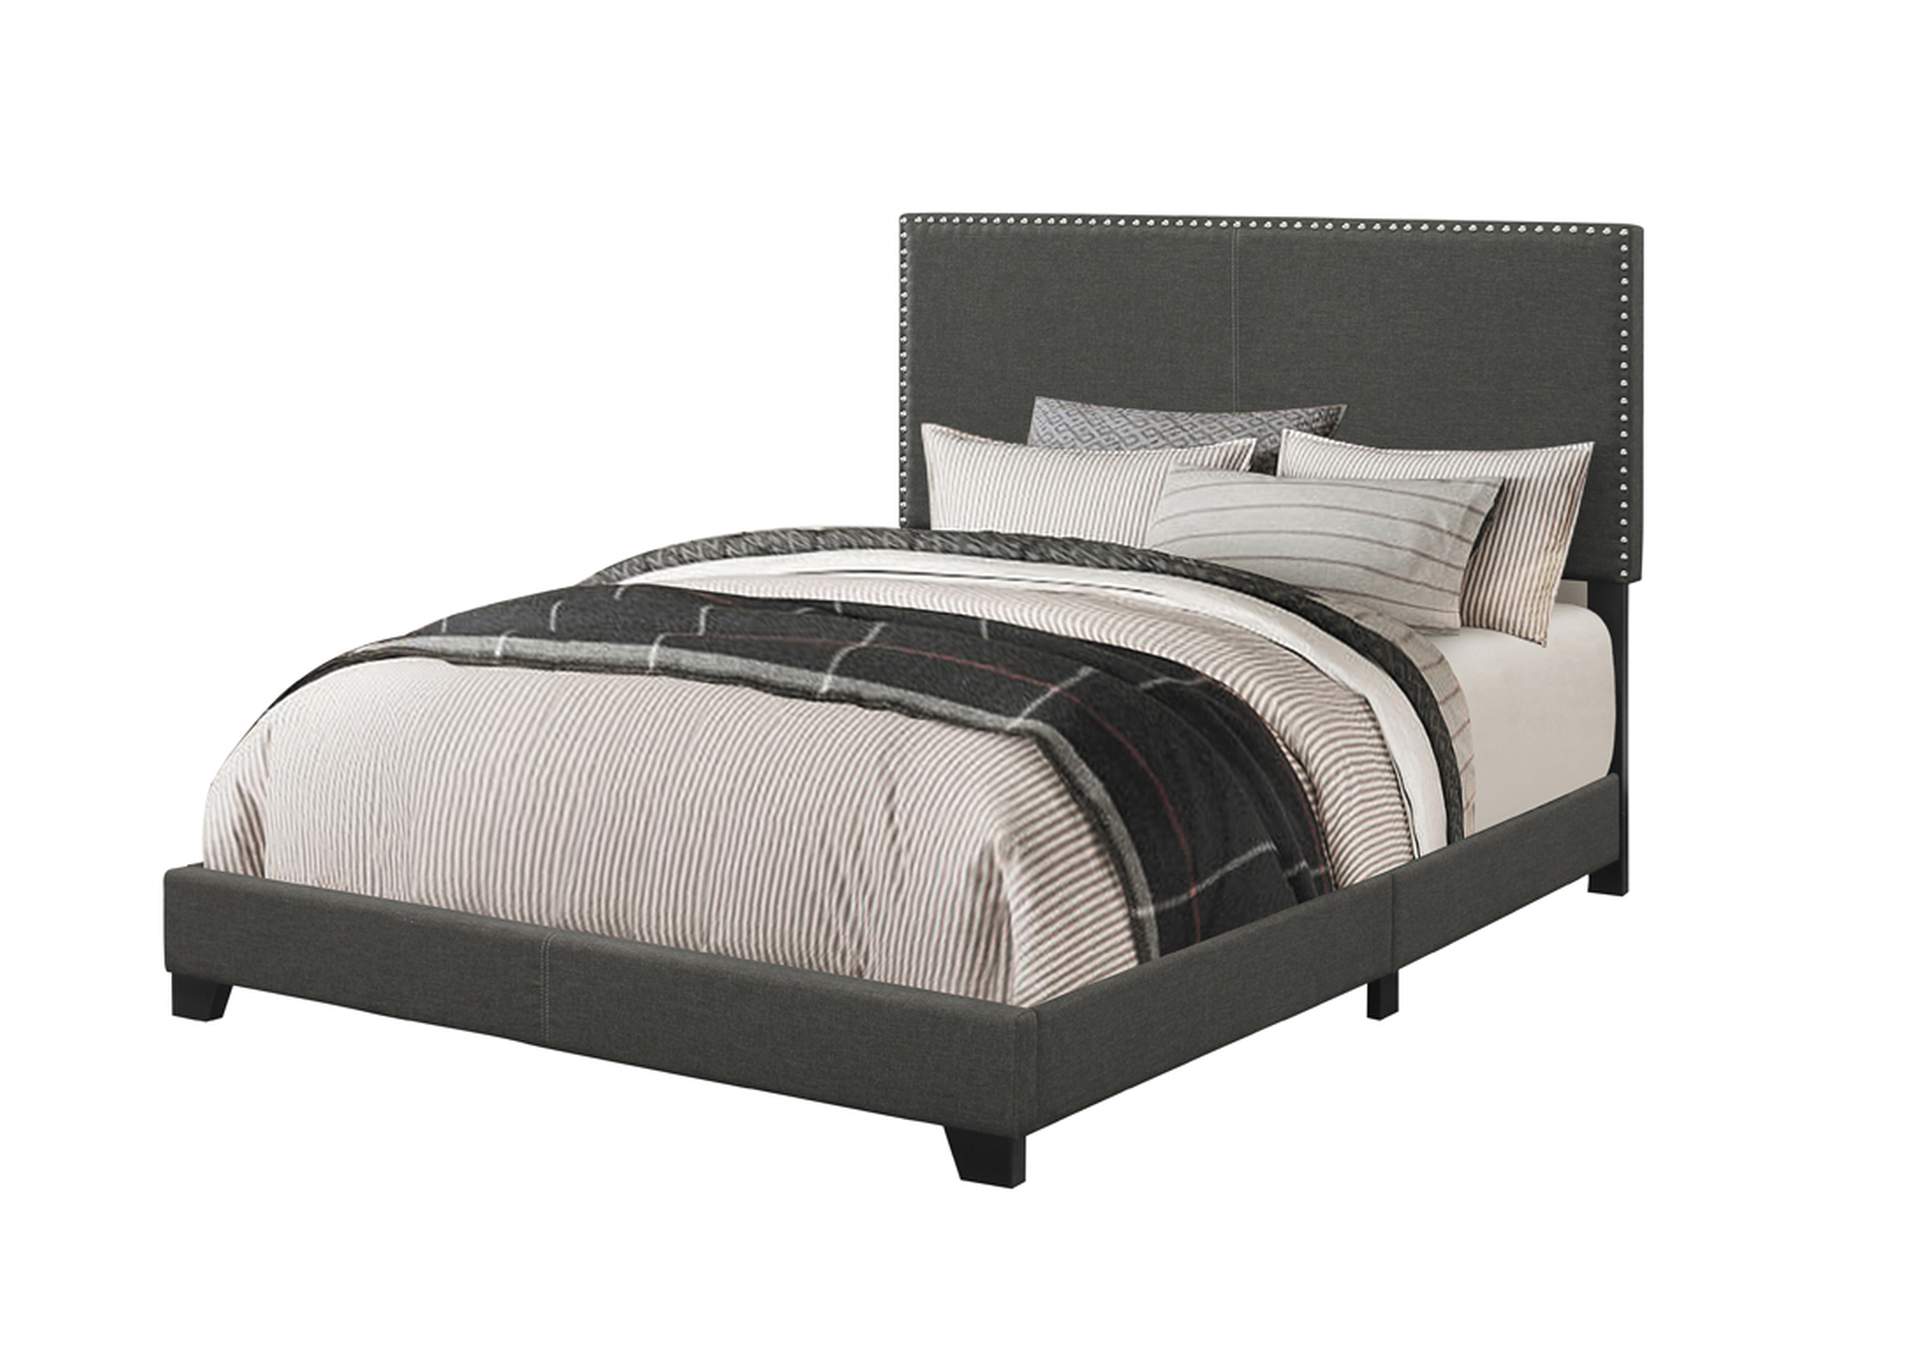 Boyd Eastern King Upholstered Bed with Nailhead Trim Charcoal,Coaster Furniture